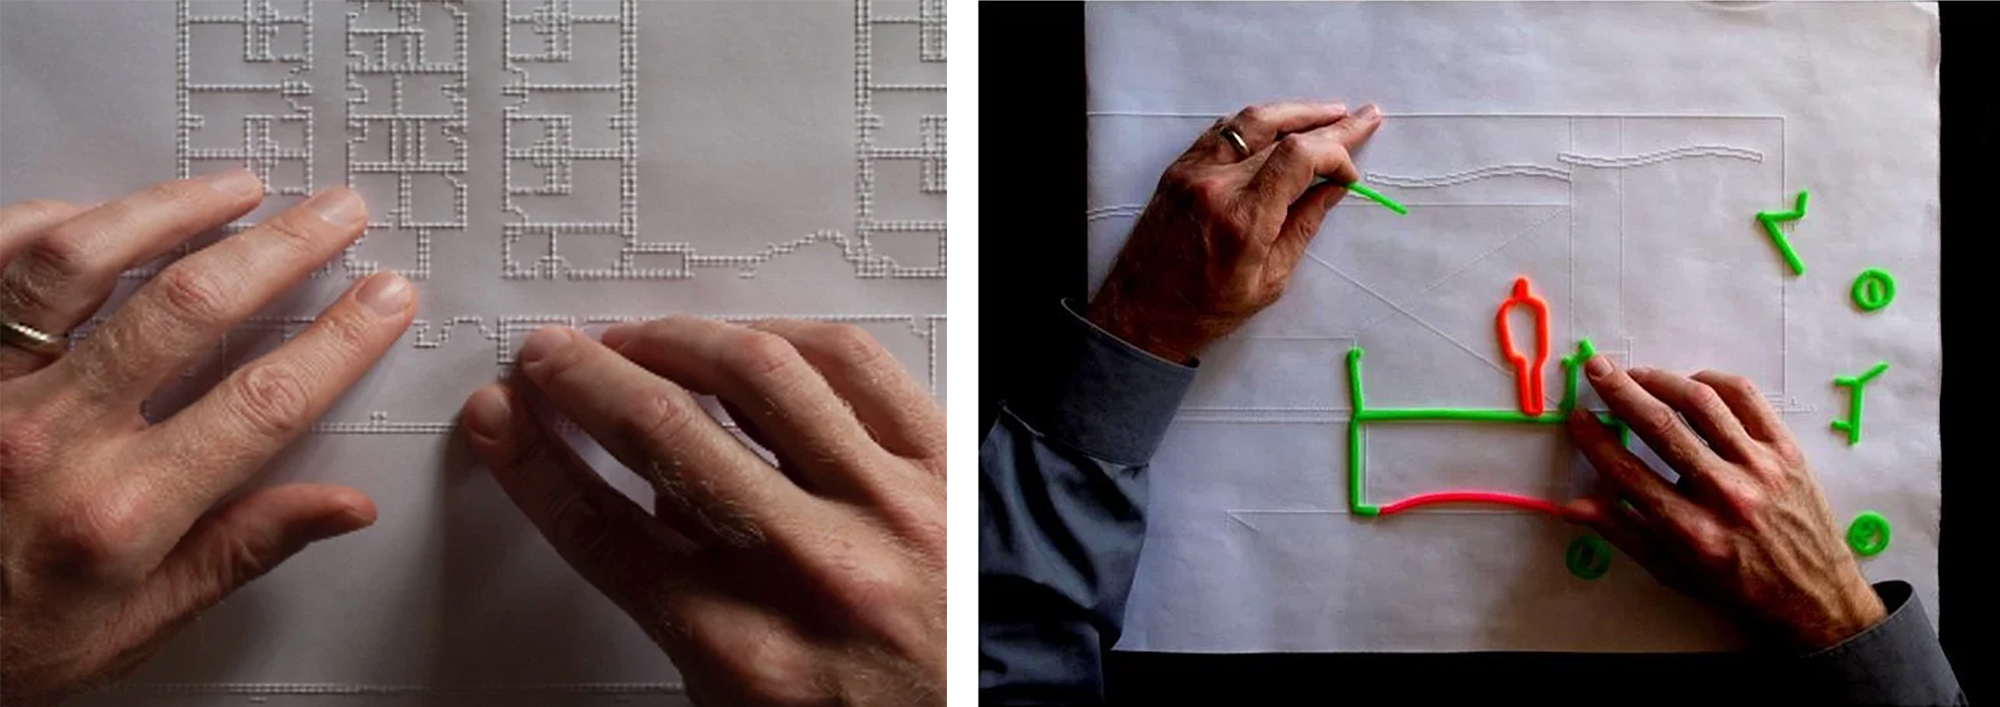 Blind architect using Braille on paper